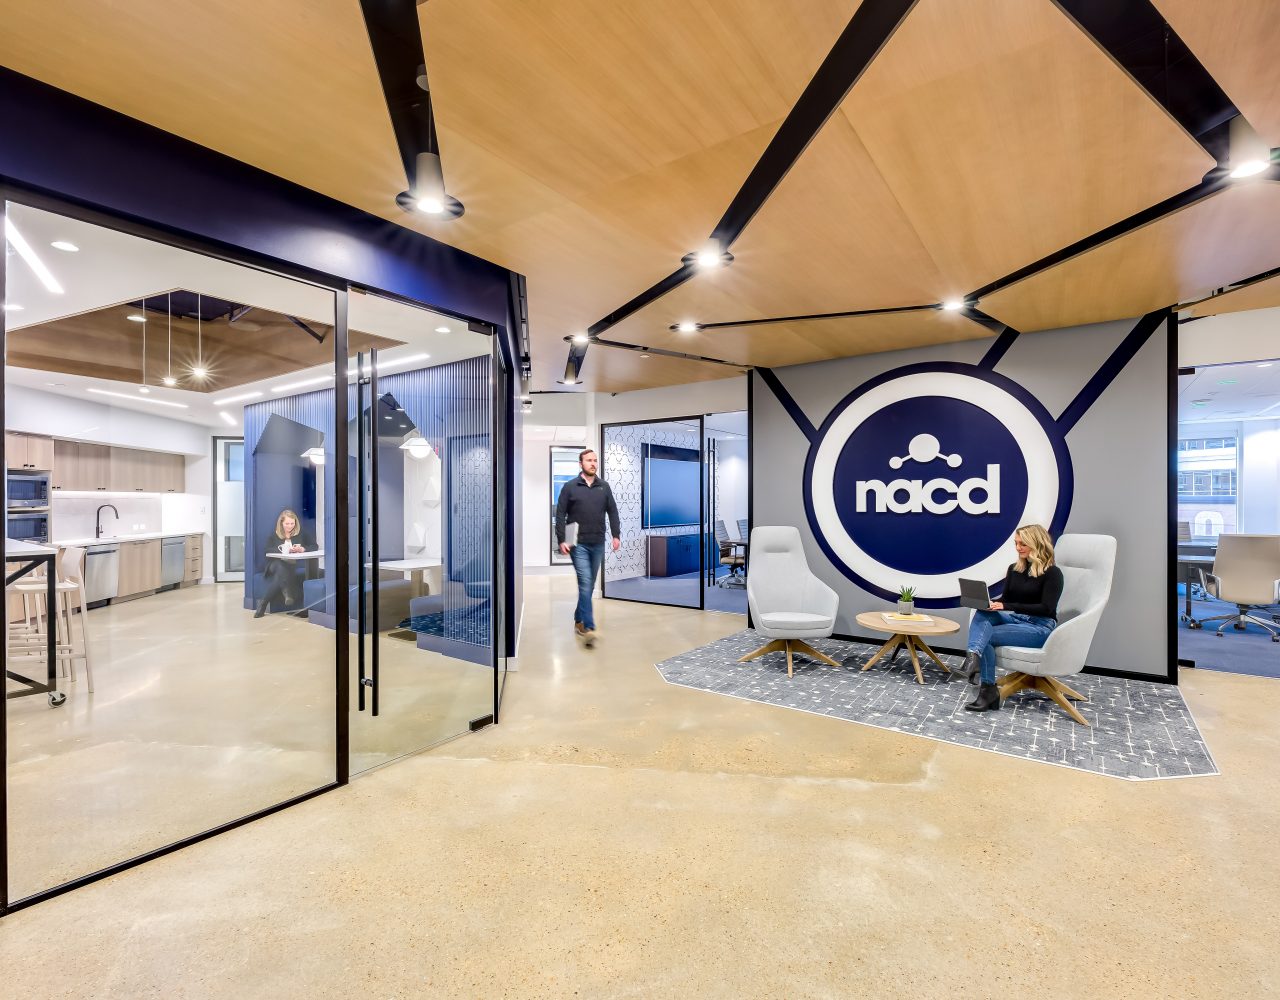 National Association of Chemical Distributors (NACD) reception designed by sshape